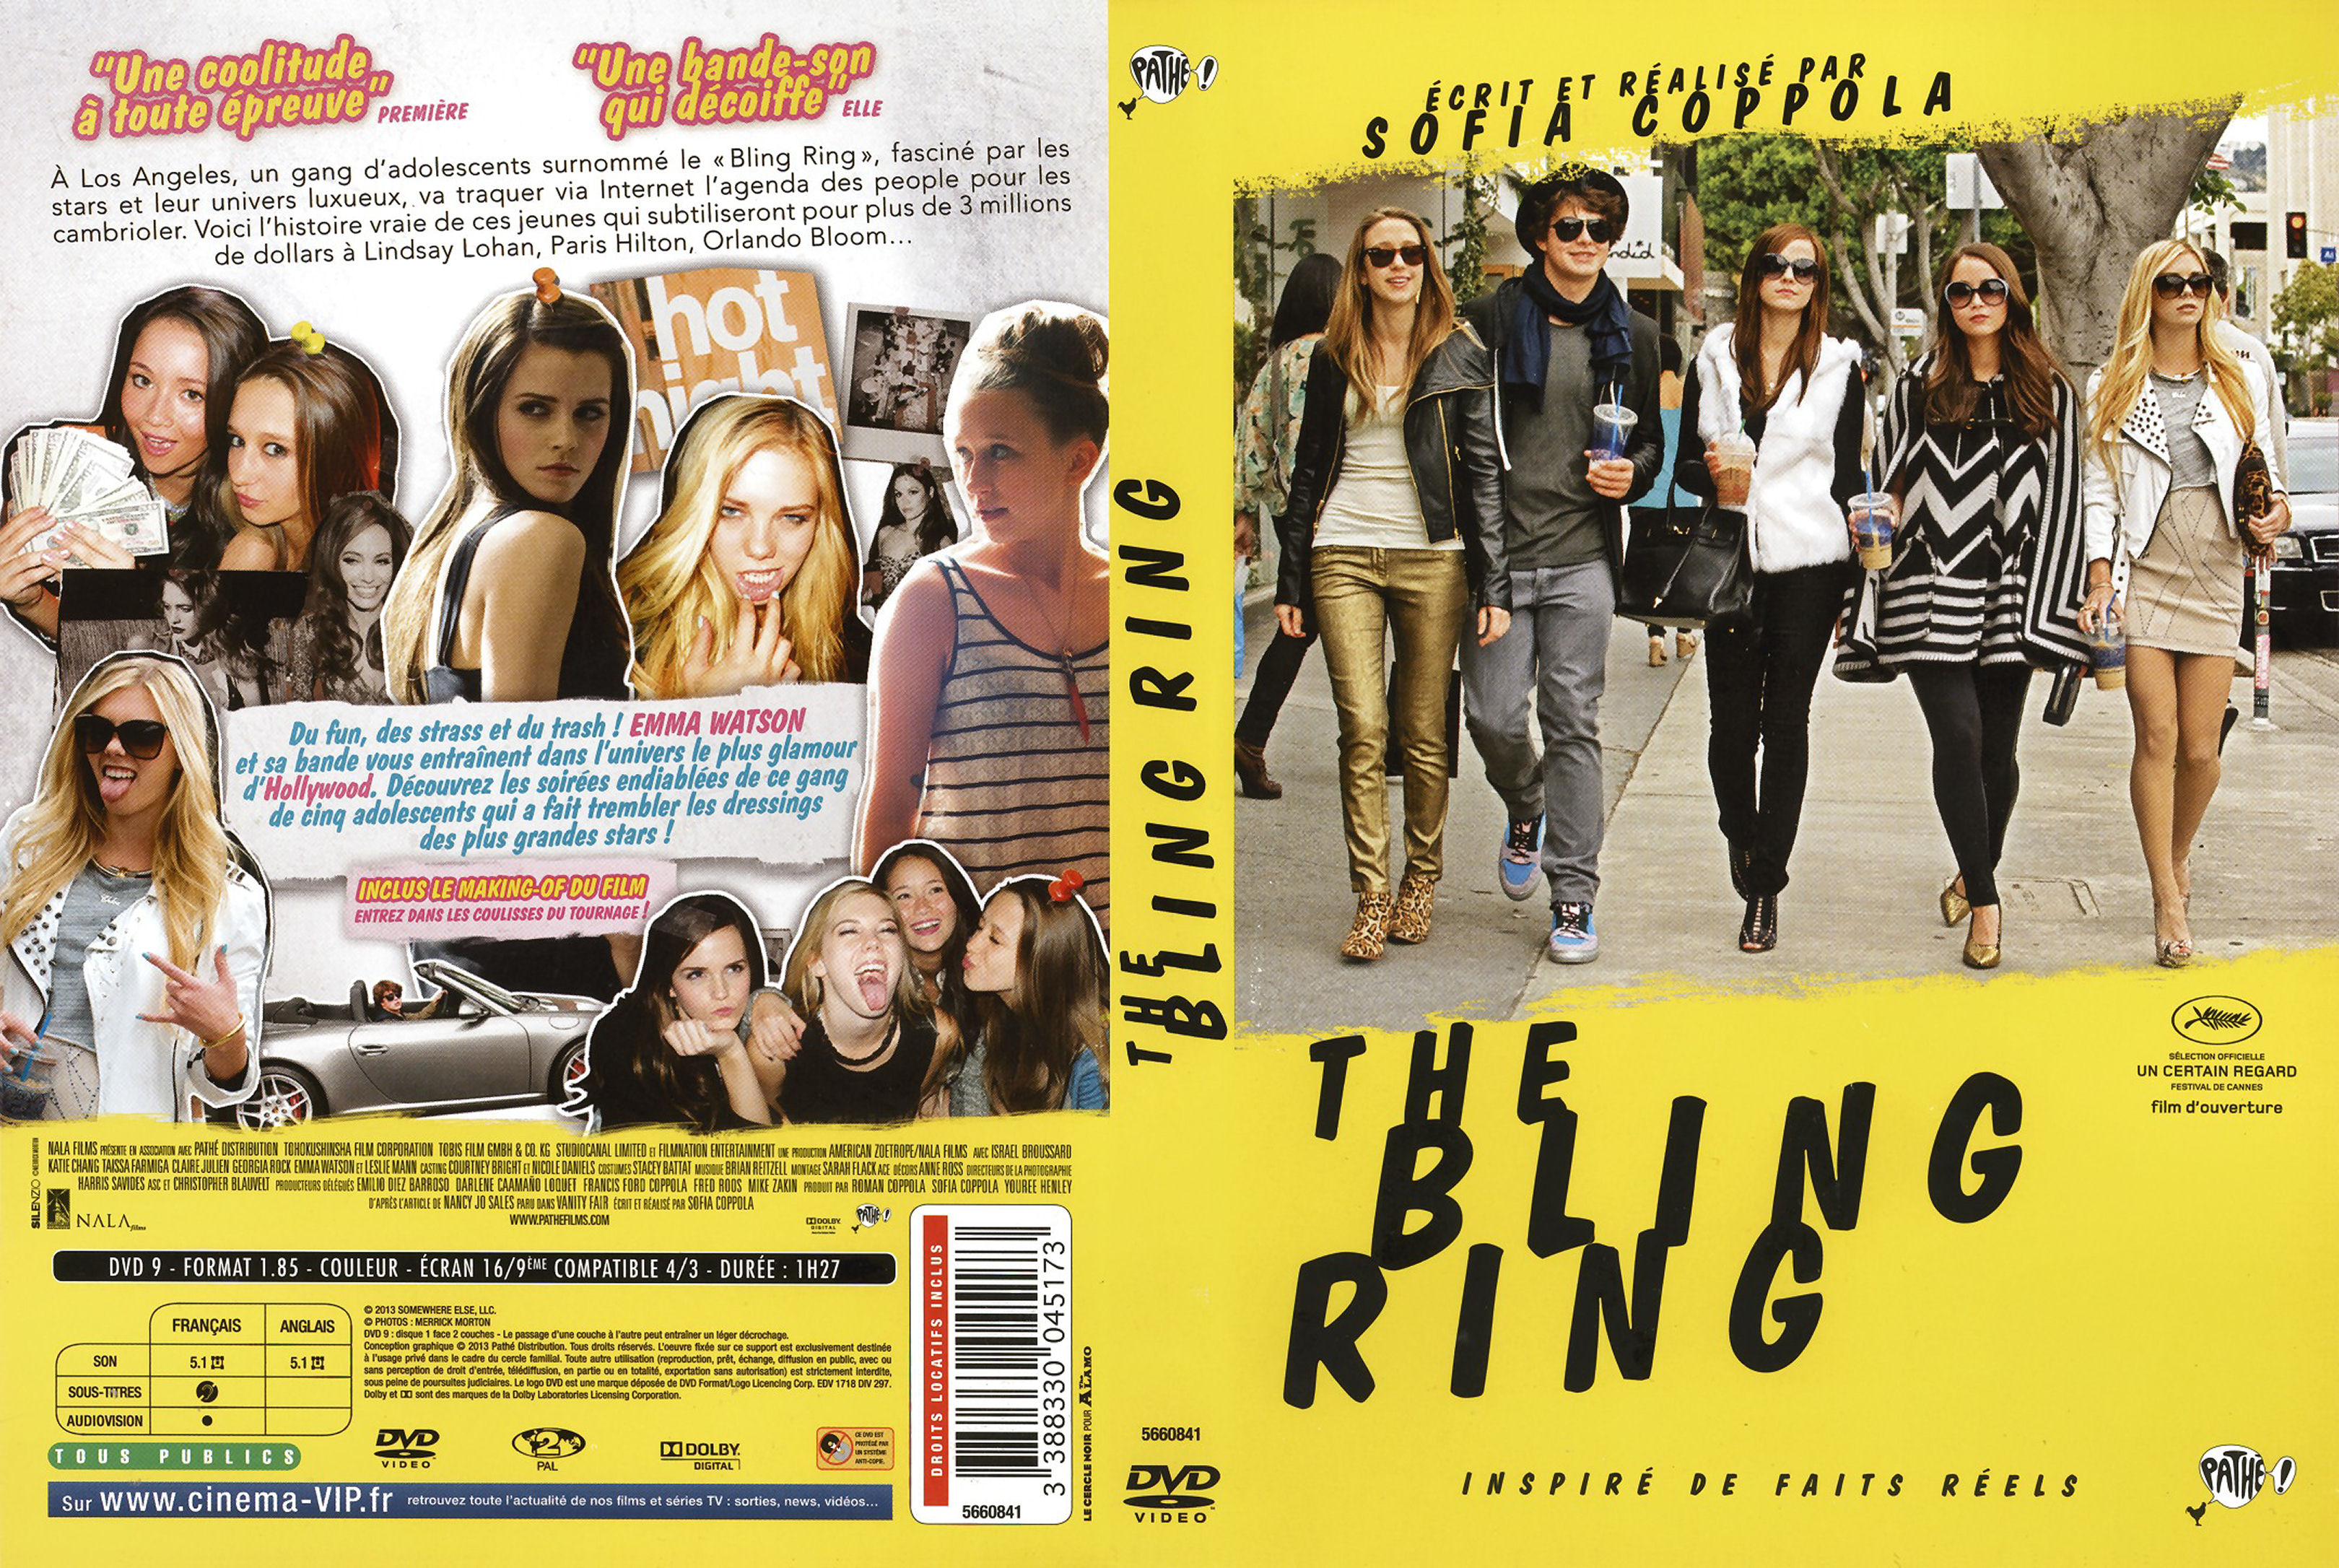 Jaquette DVD The Bling Ring